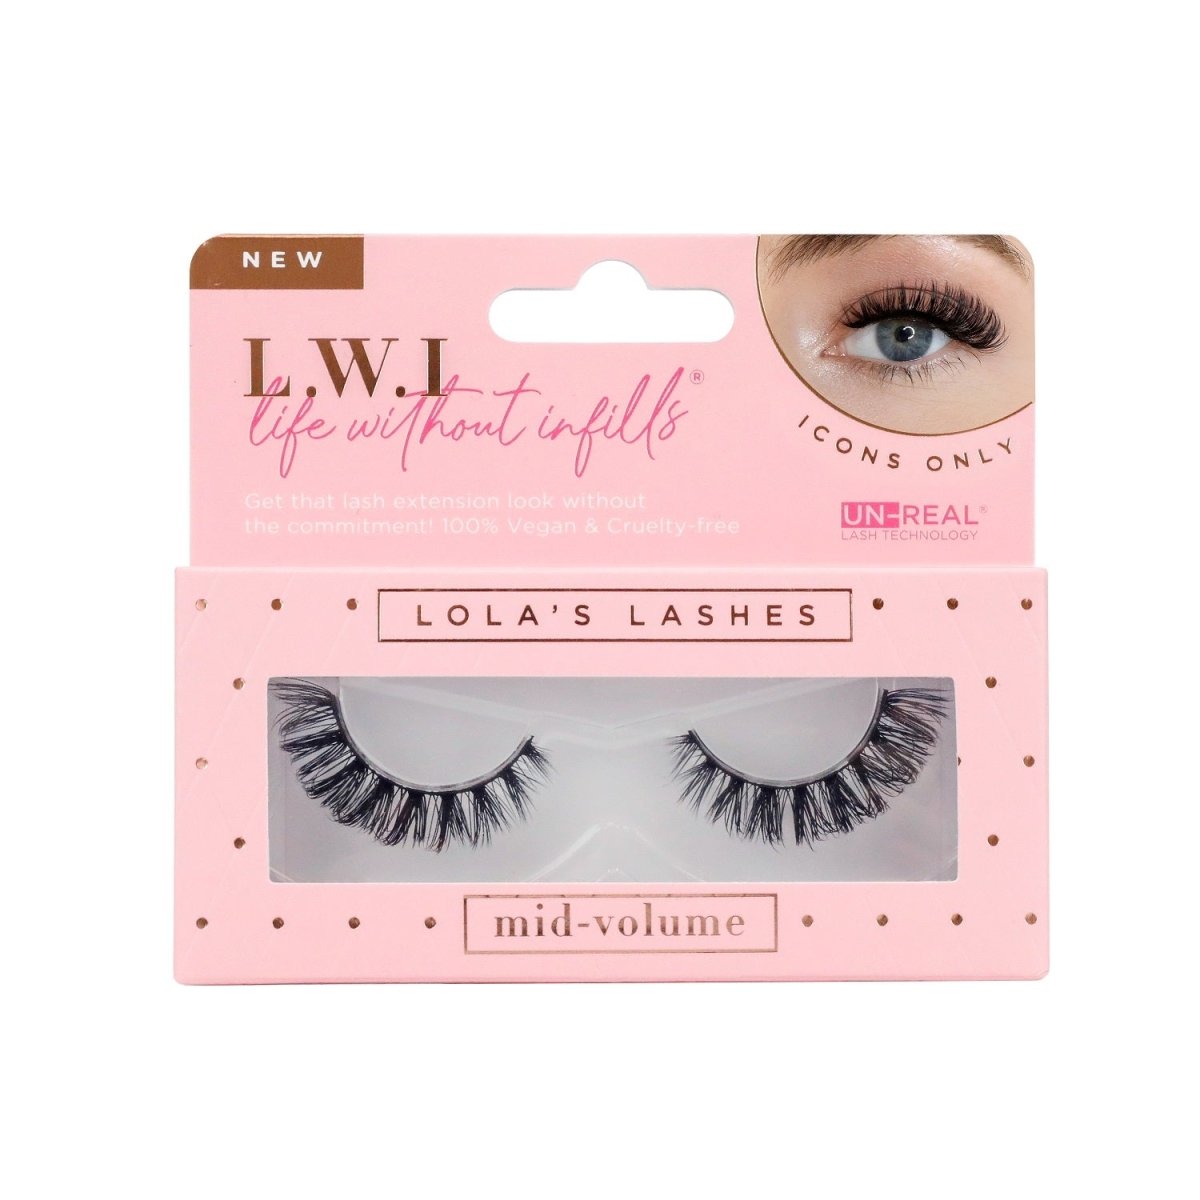 L.W.I Icons Only Russian Strip Lashes - Lola's Lashes